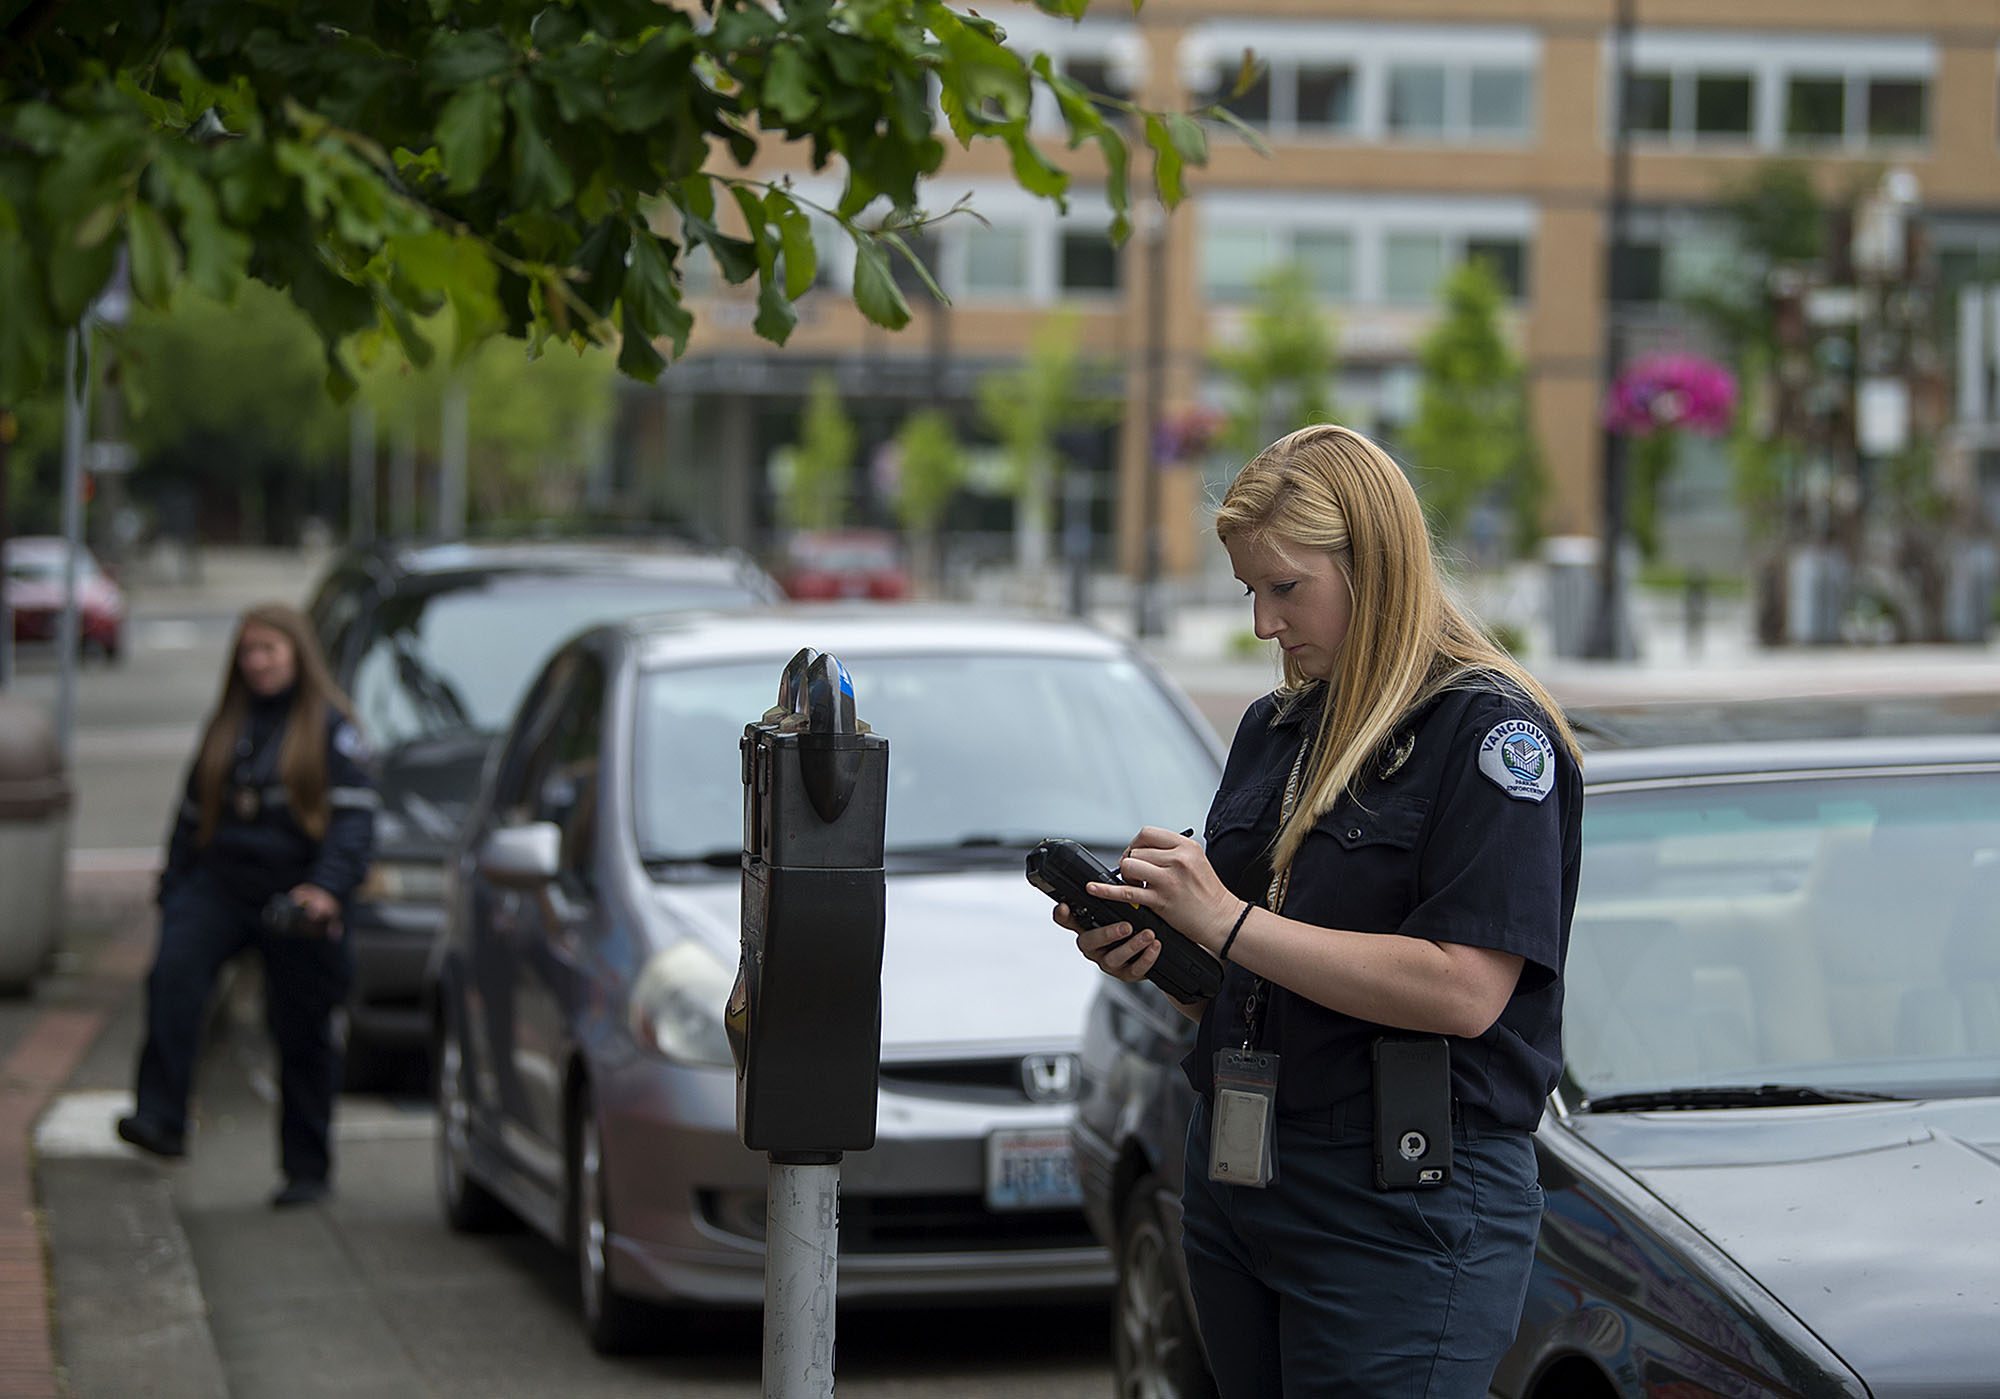 Parking enforcement officer Holly Naramore issues a ticket for an expired meter in downtown Vancouver in May 25.